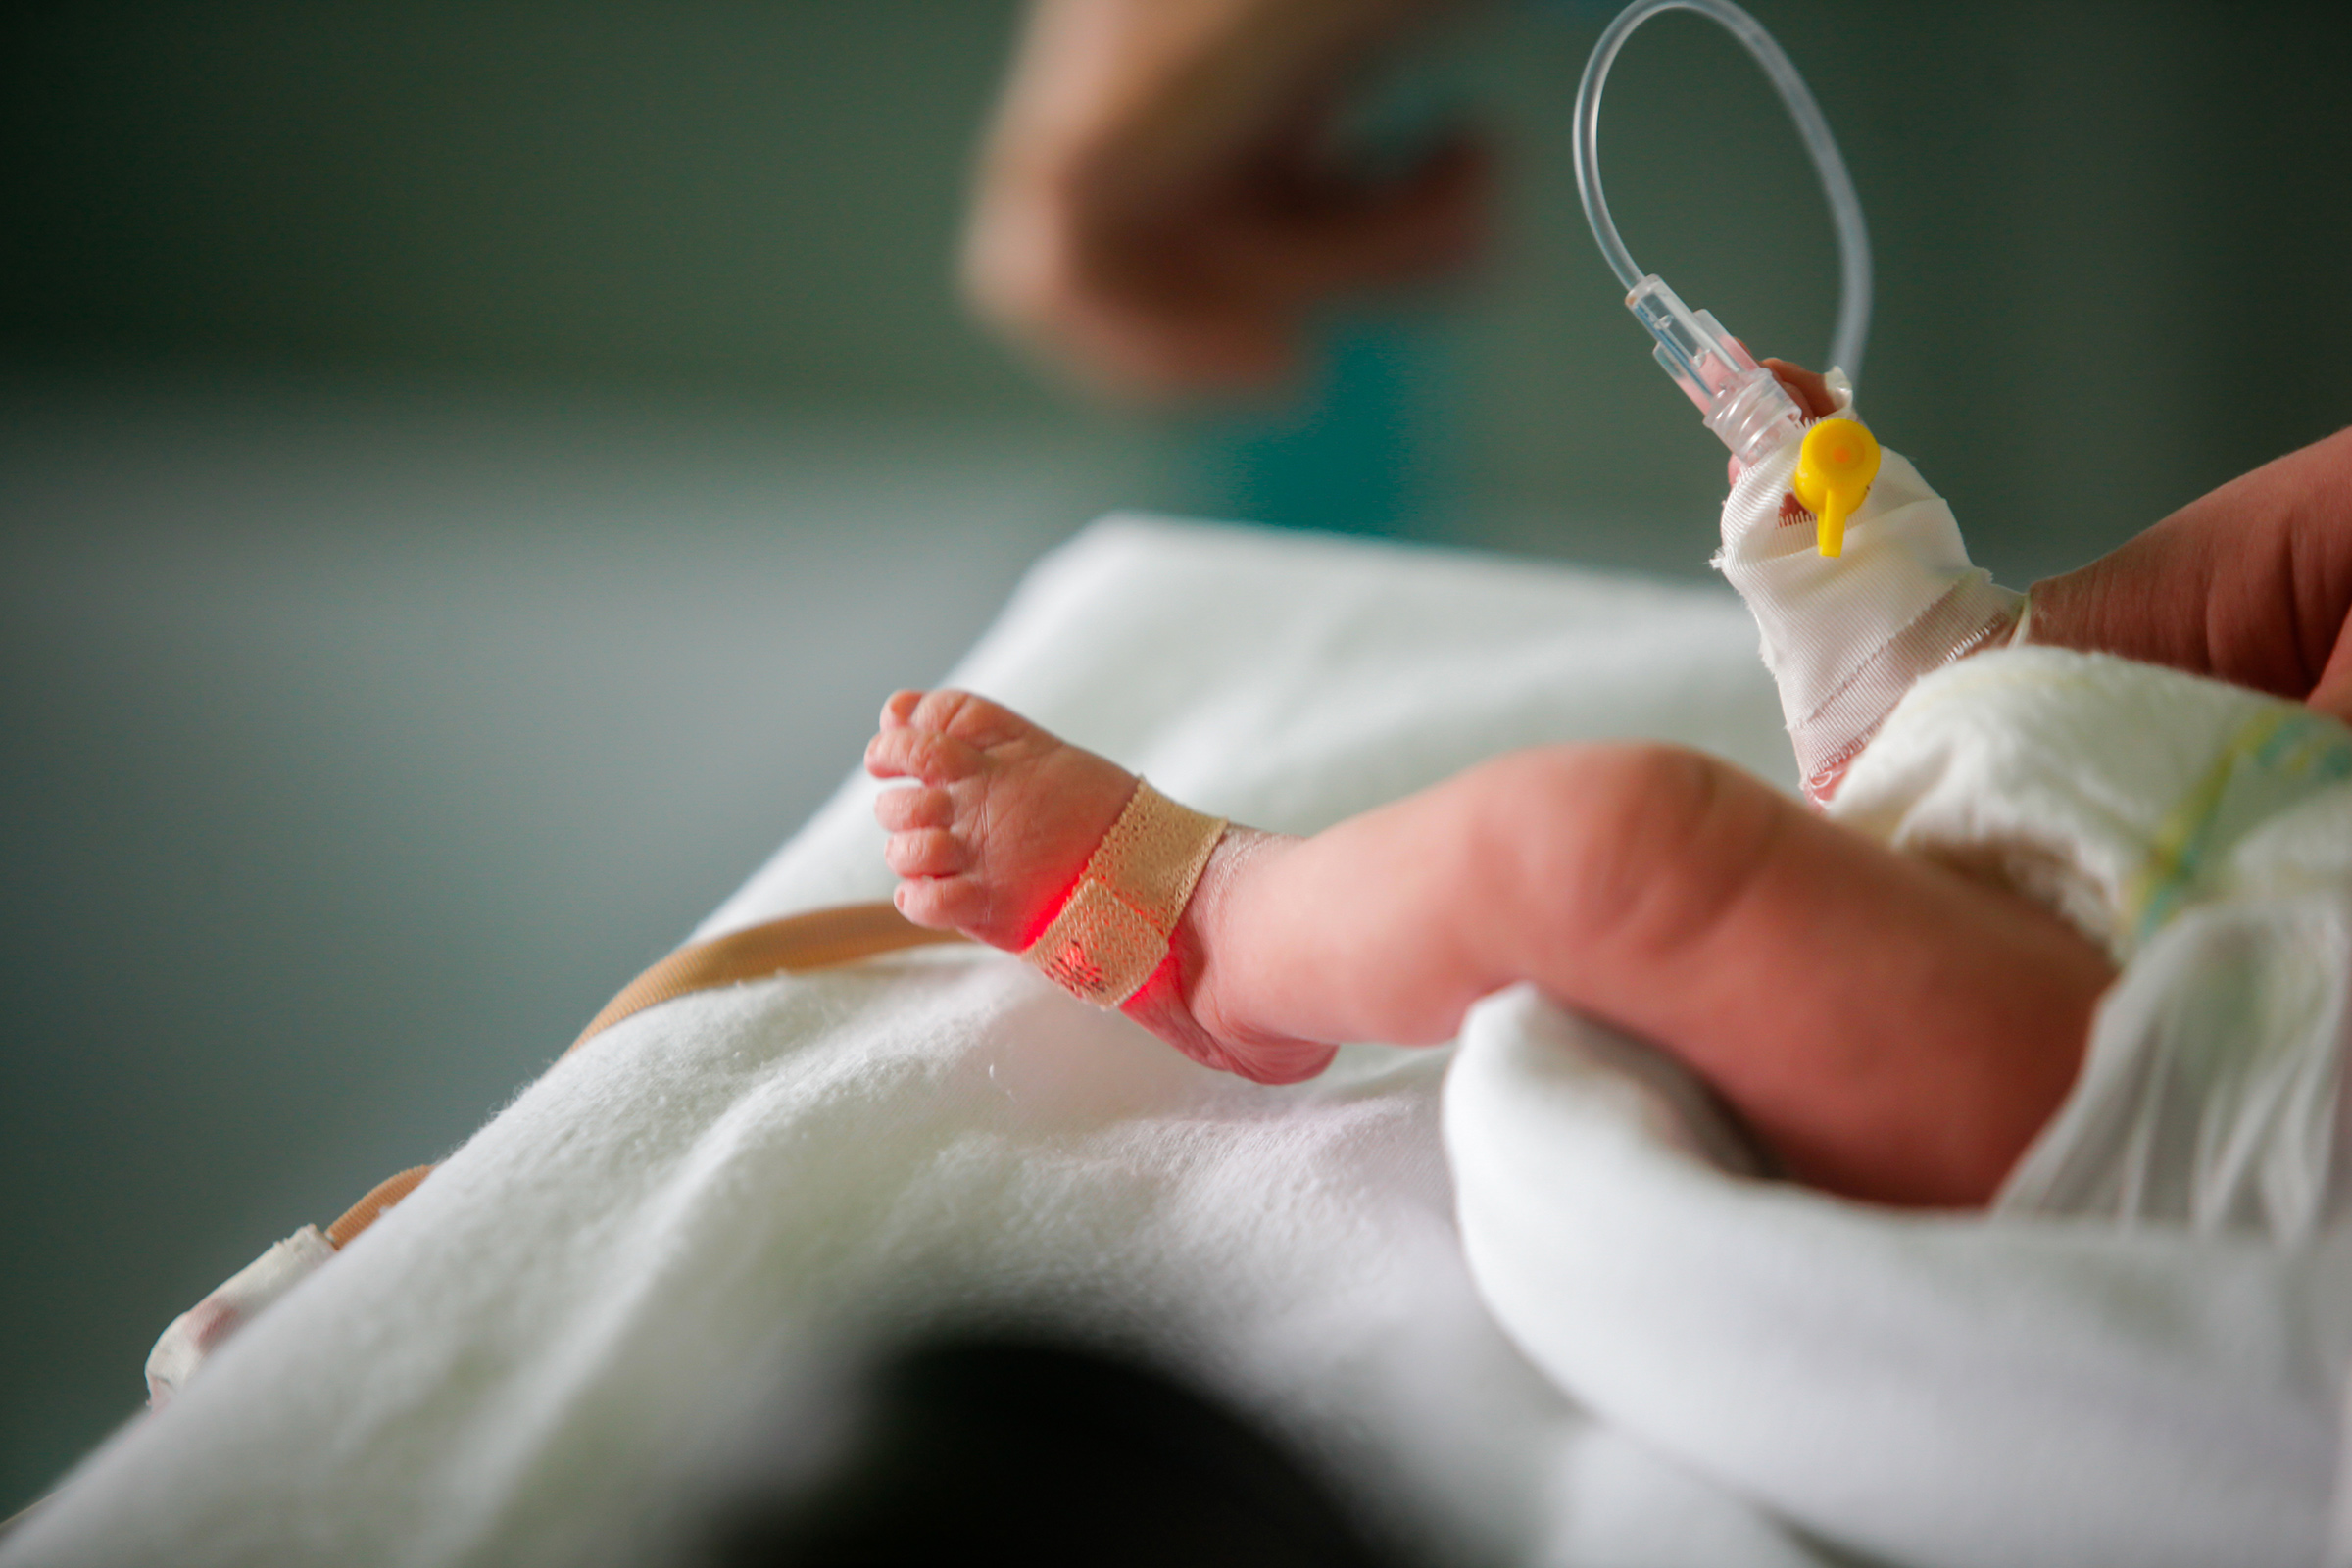 A preterm baby in an incubator in the neonatal section of a hospital. (George Calin—Getty Images)